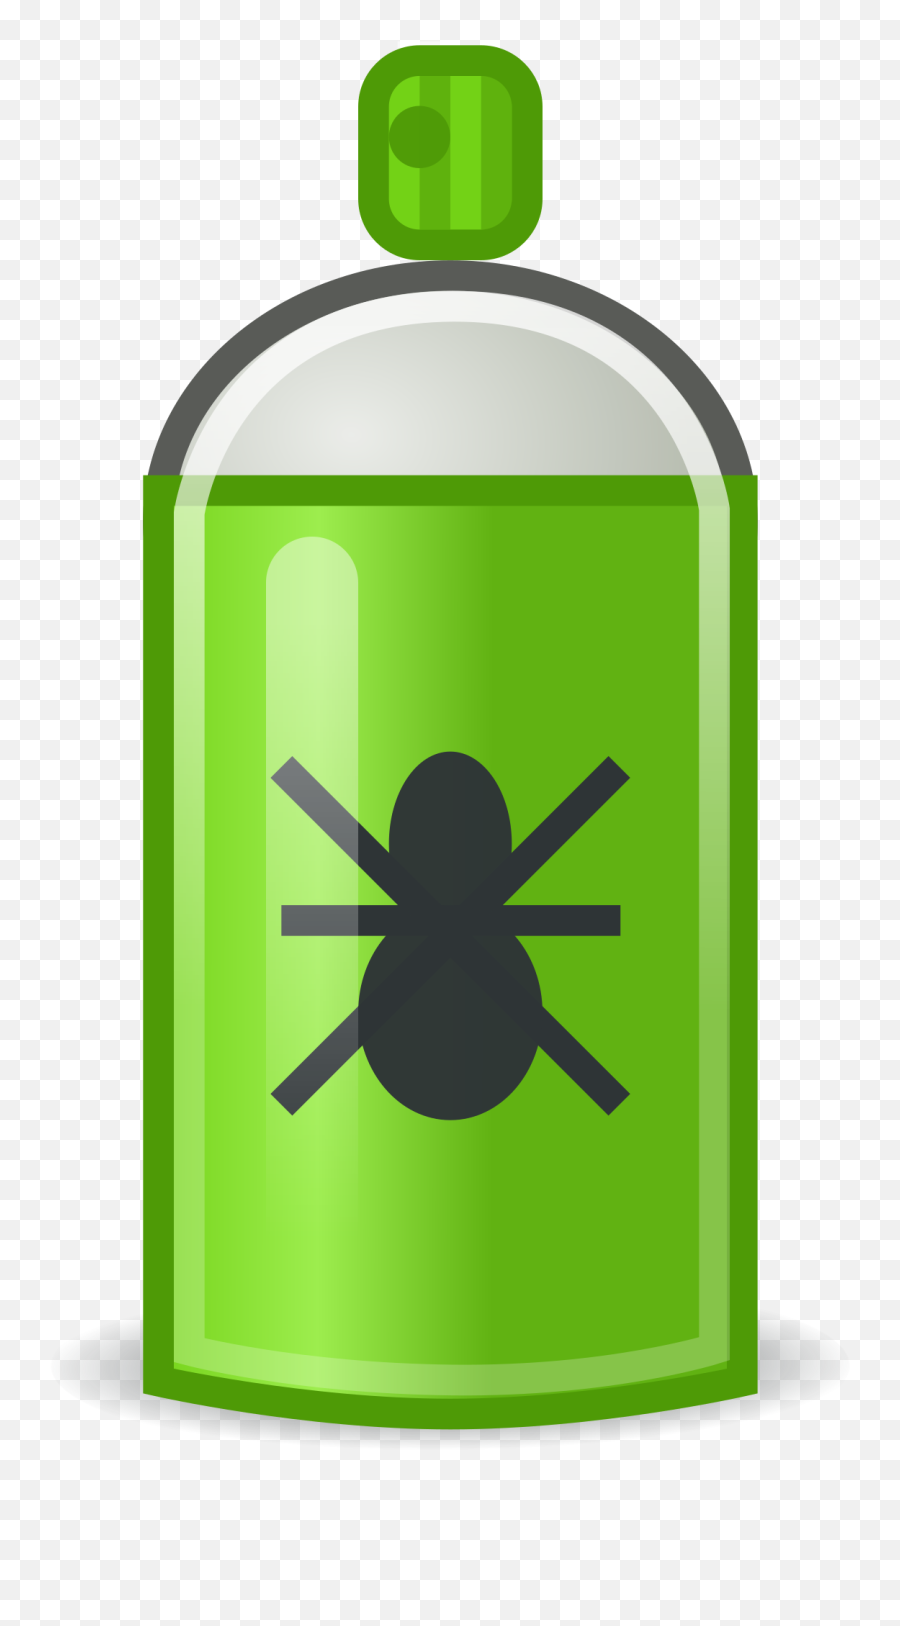 Filenemiver - Iconsvg Wikipedia Cylinder Png,Icon Bitmaps